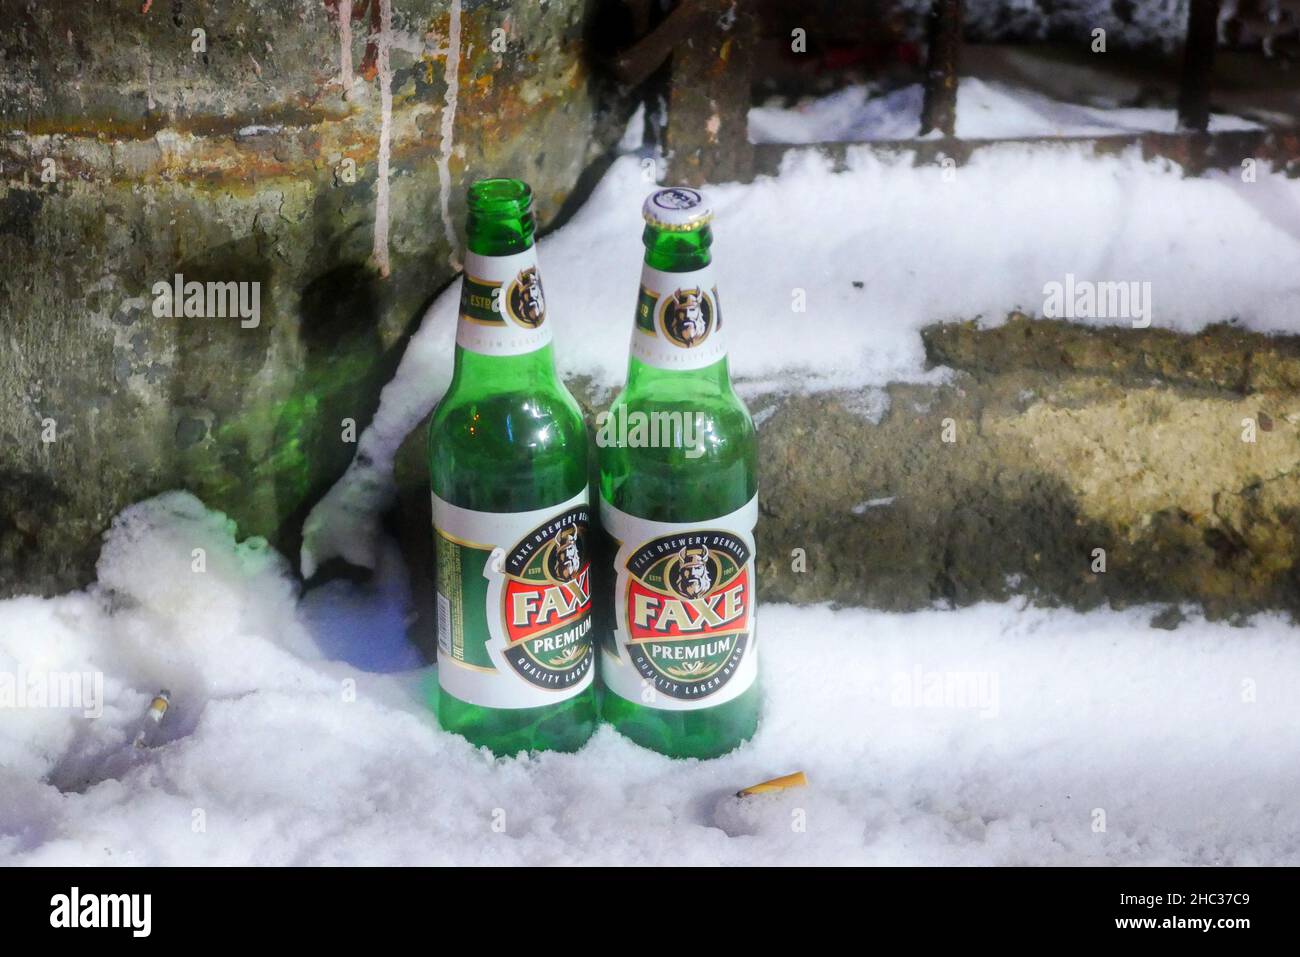 Moscow, Russia - December 14, 2021: Winter,  Two glass green empty beer bottles in the snow, brand strong beer'Faxe Brewery' - Danish Brewing Company, Stock Photo